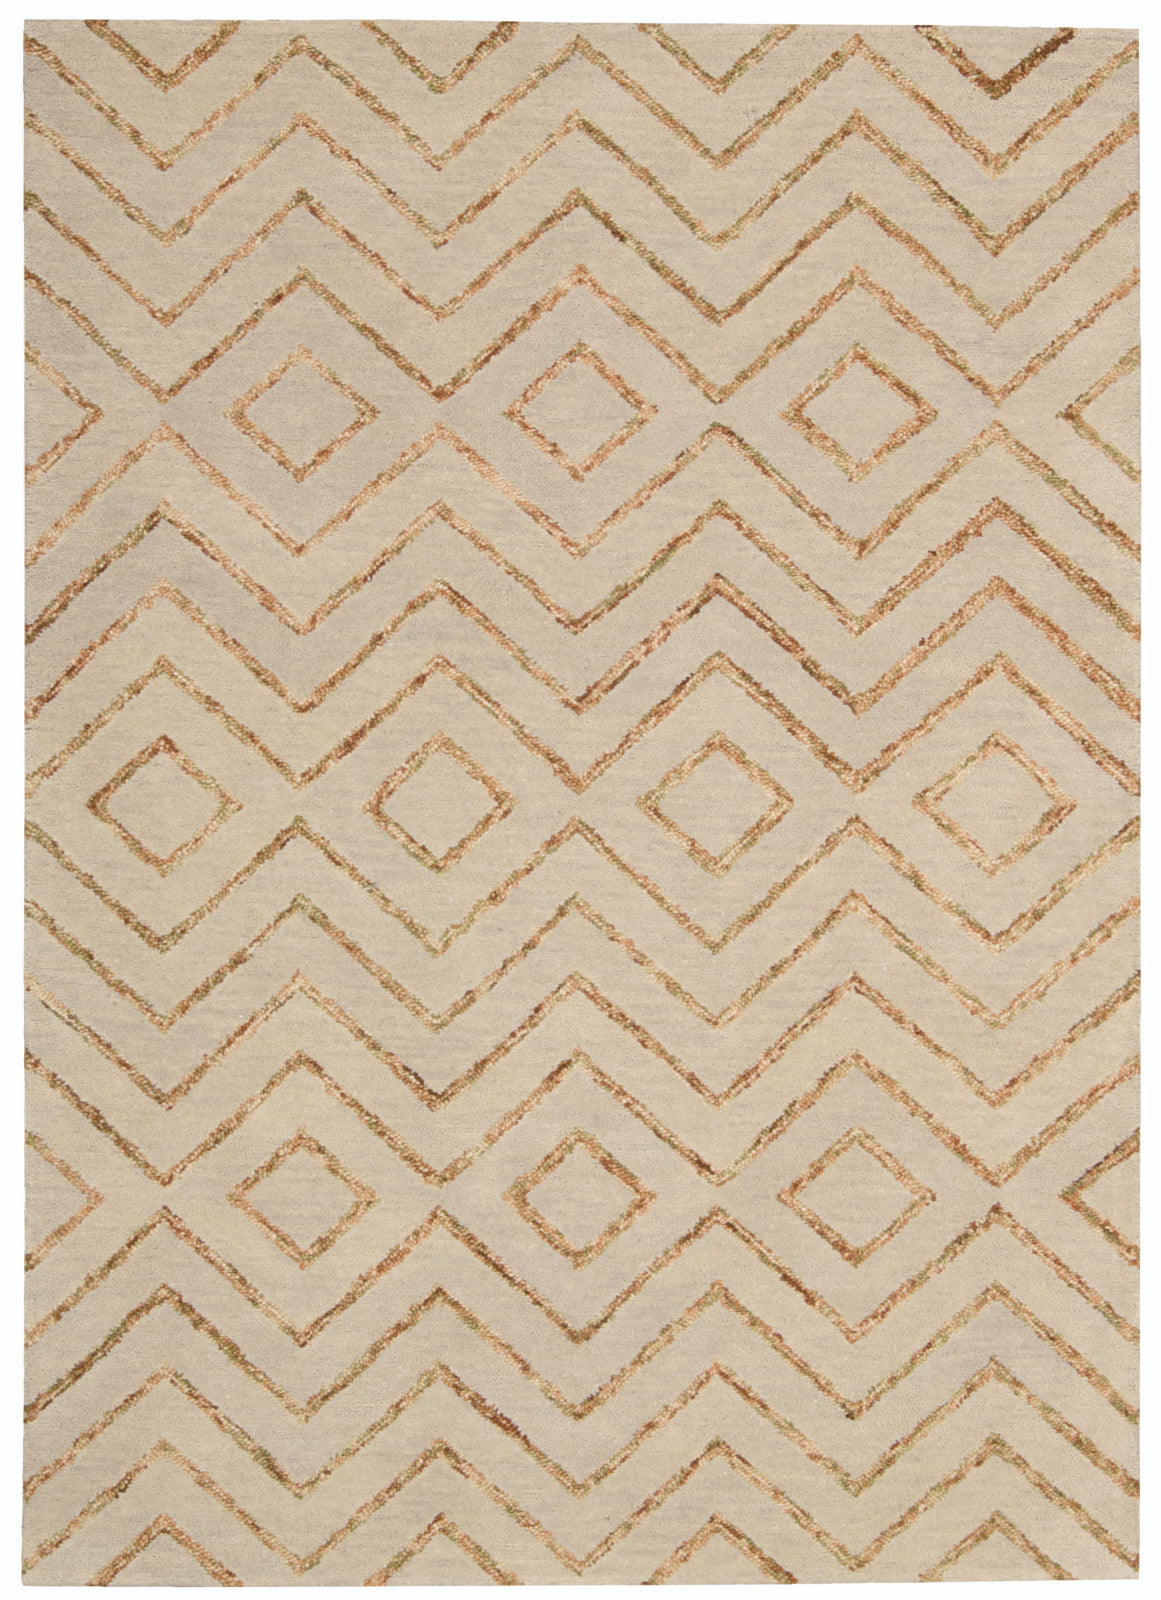 Nourison Intermix INT04 Sand Area Rug by Barclay Butera main image